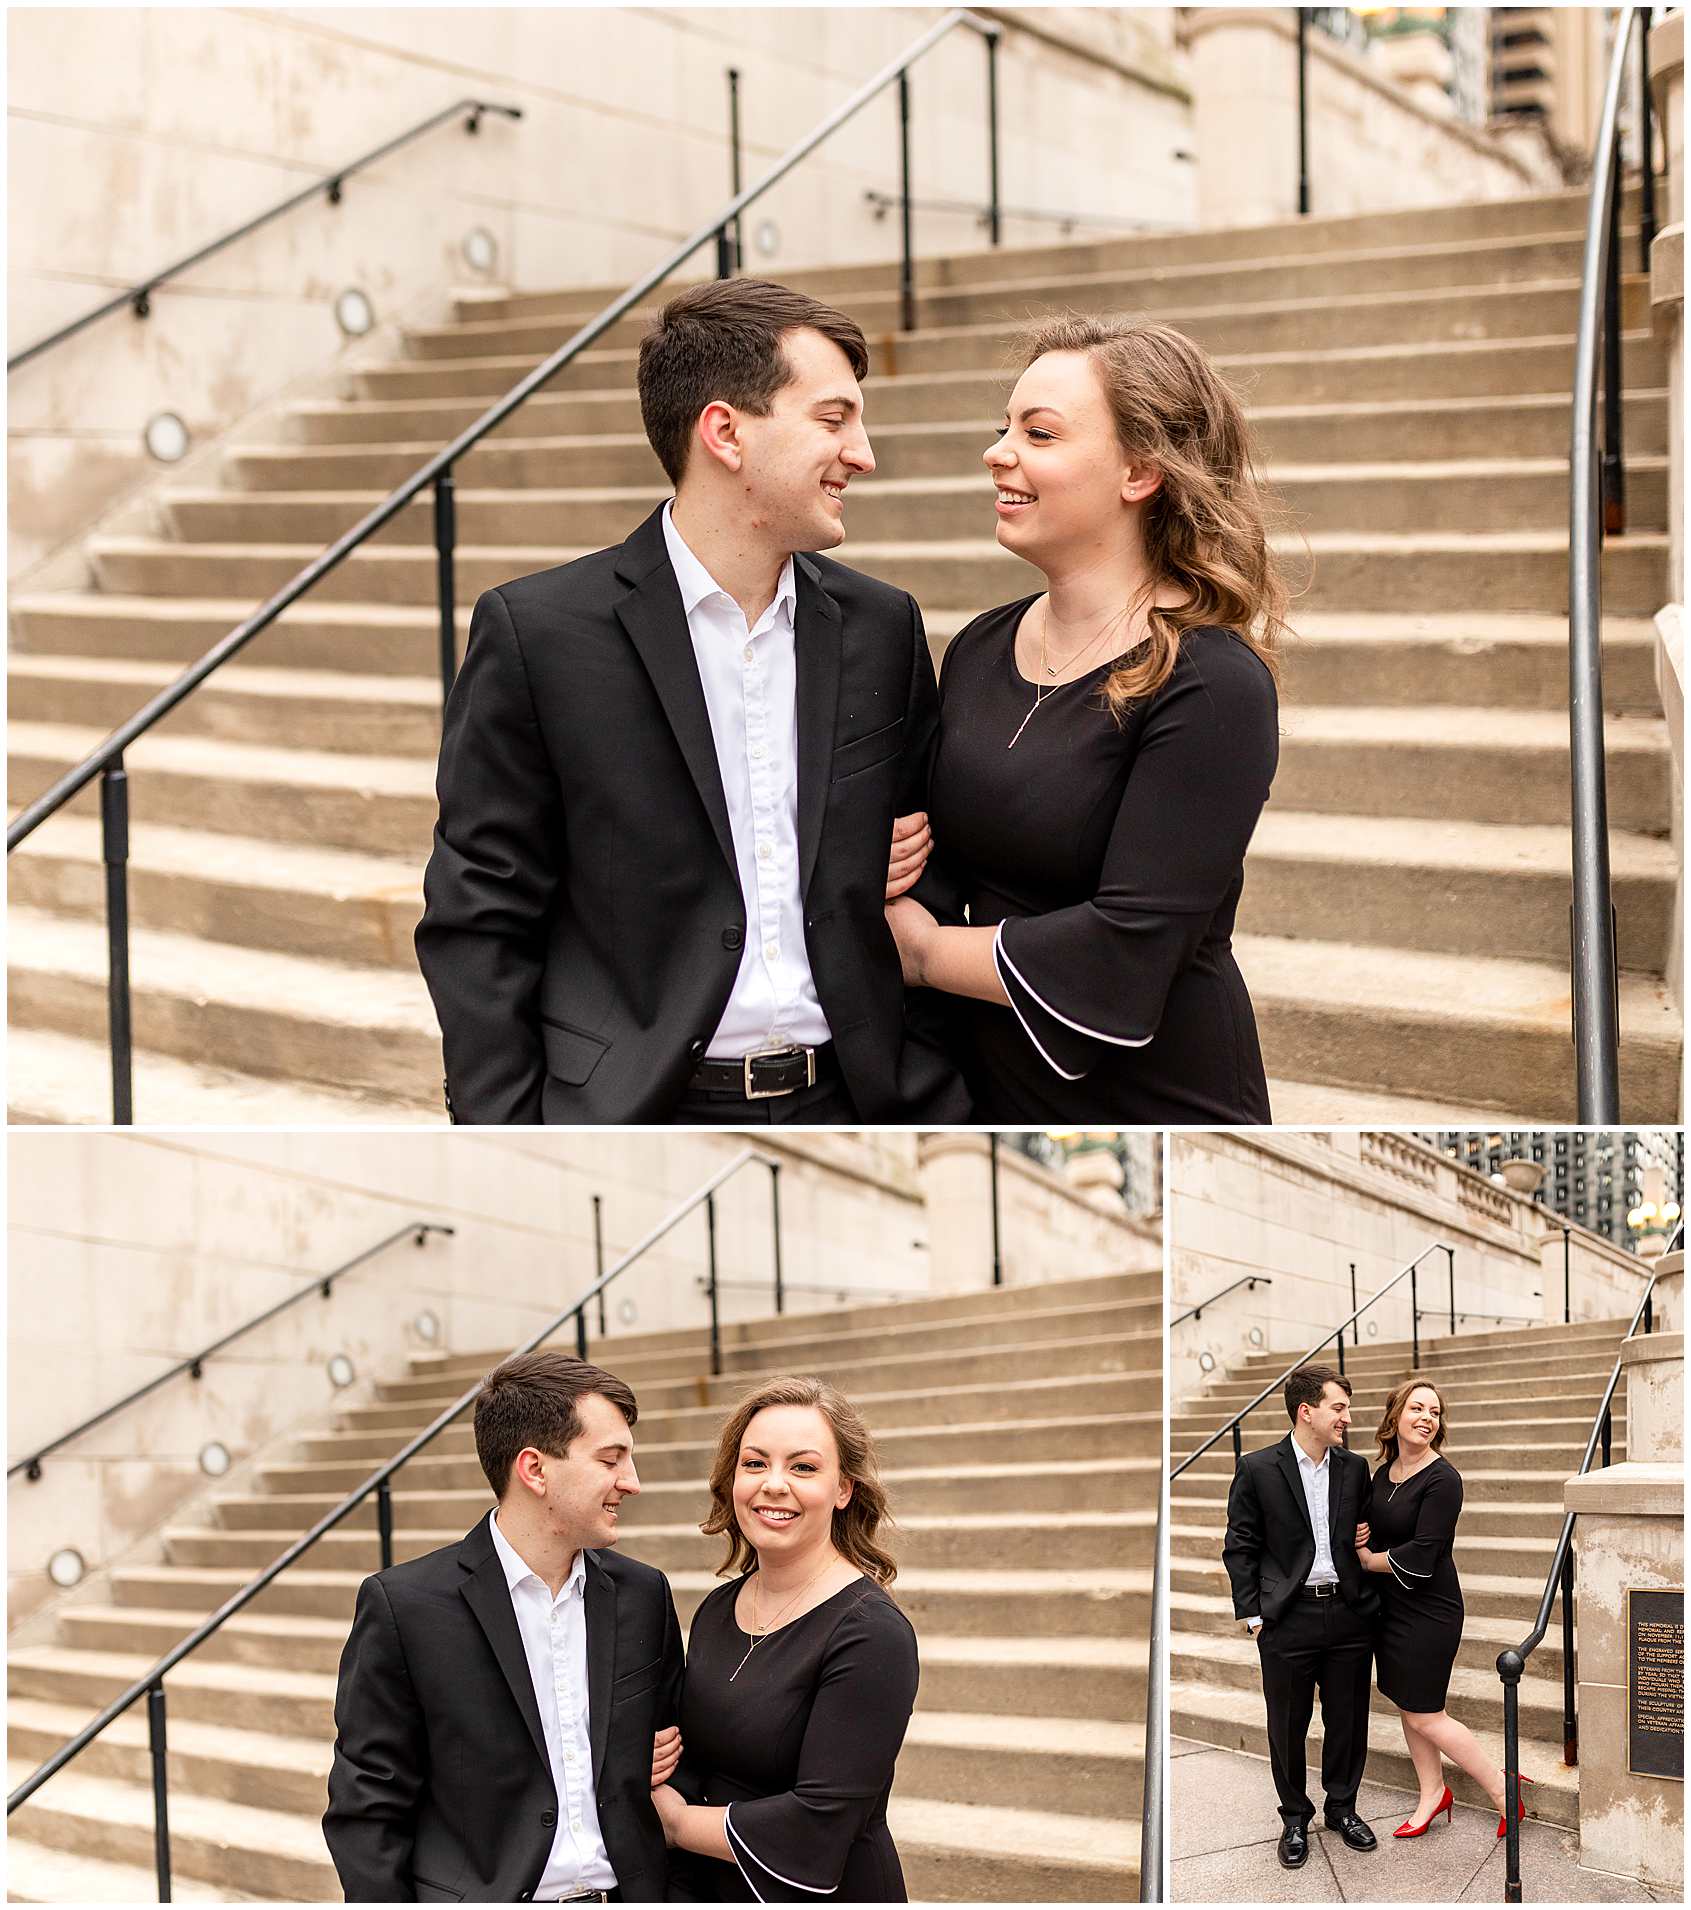 Spring Engagement Photos on Chicago Riverwalk Stairs, Formal Engagement in Downtown Chicago, Elle Taylor Photography